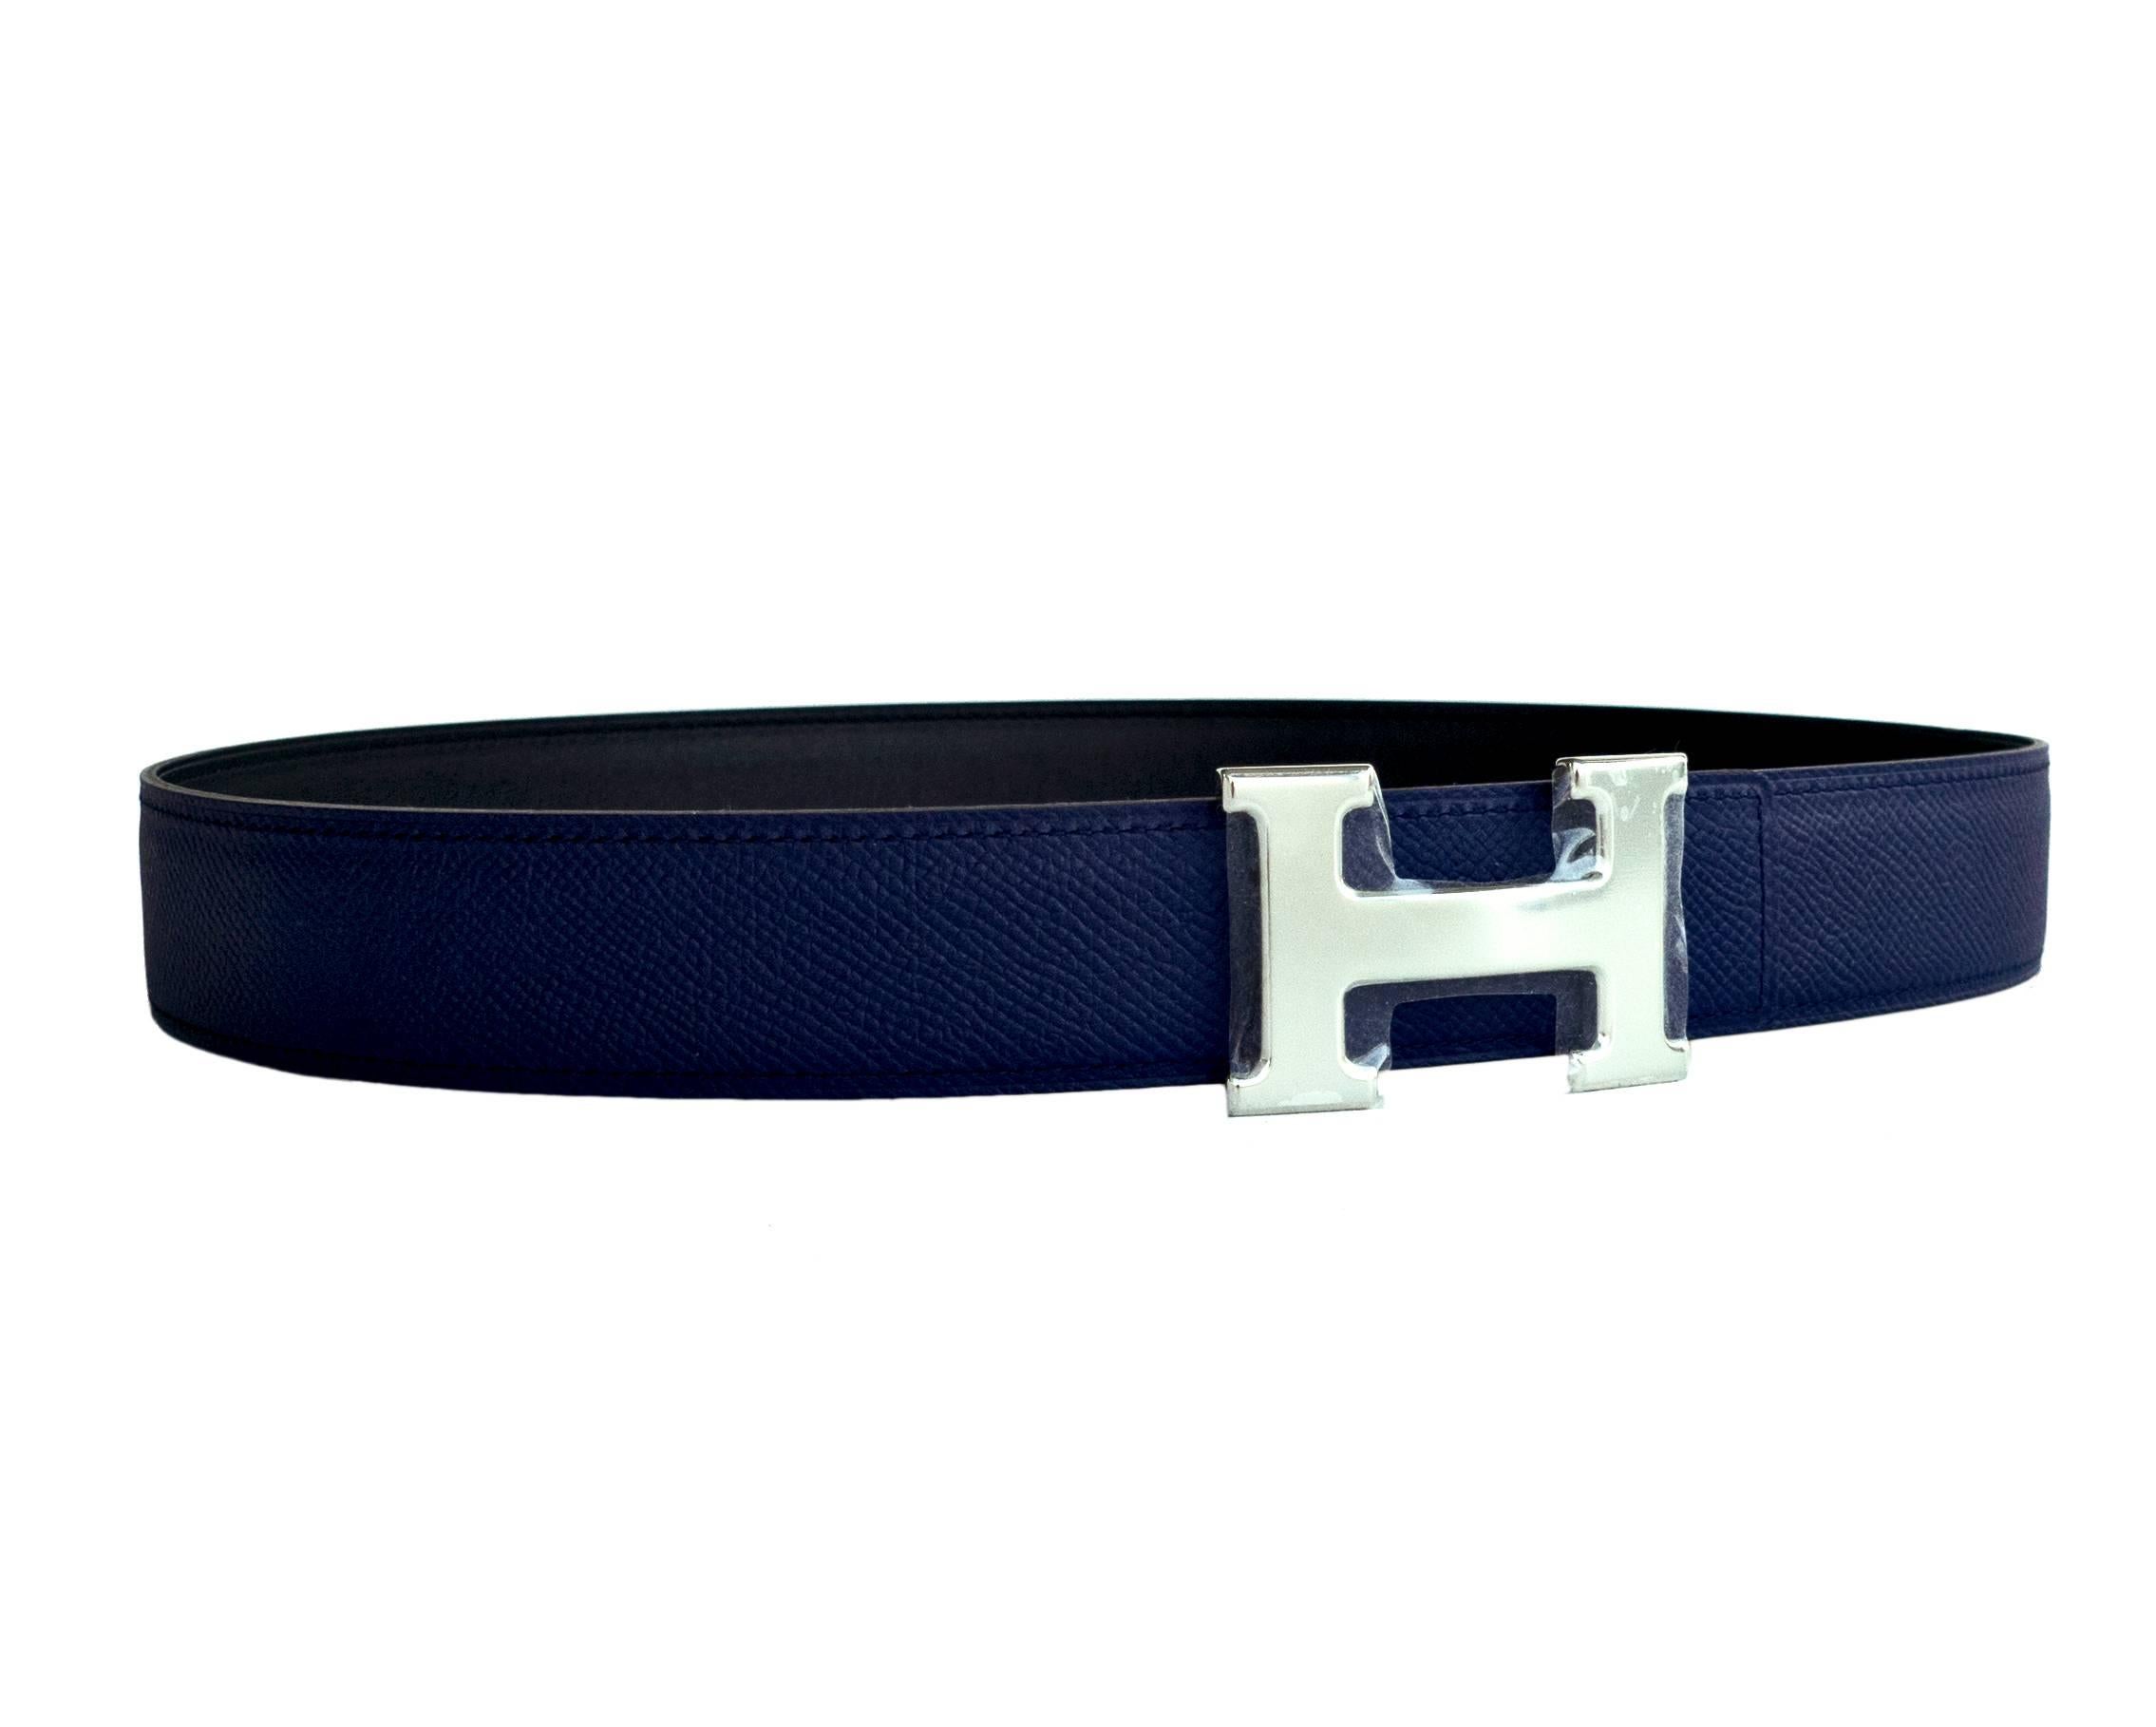 Store fresh. Pristine condition. 
Perfect gift! Comes full set with Hermes belt strap, belt buckle, sleeper for belt buckle, signature Hermes belt box, and ribbon. 
Rare color combination in this Unisex reversible H buckle belt kit. 
On one side